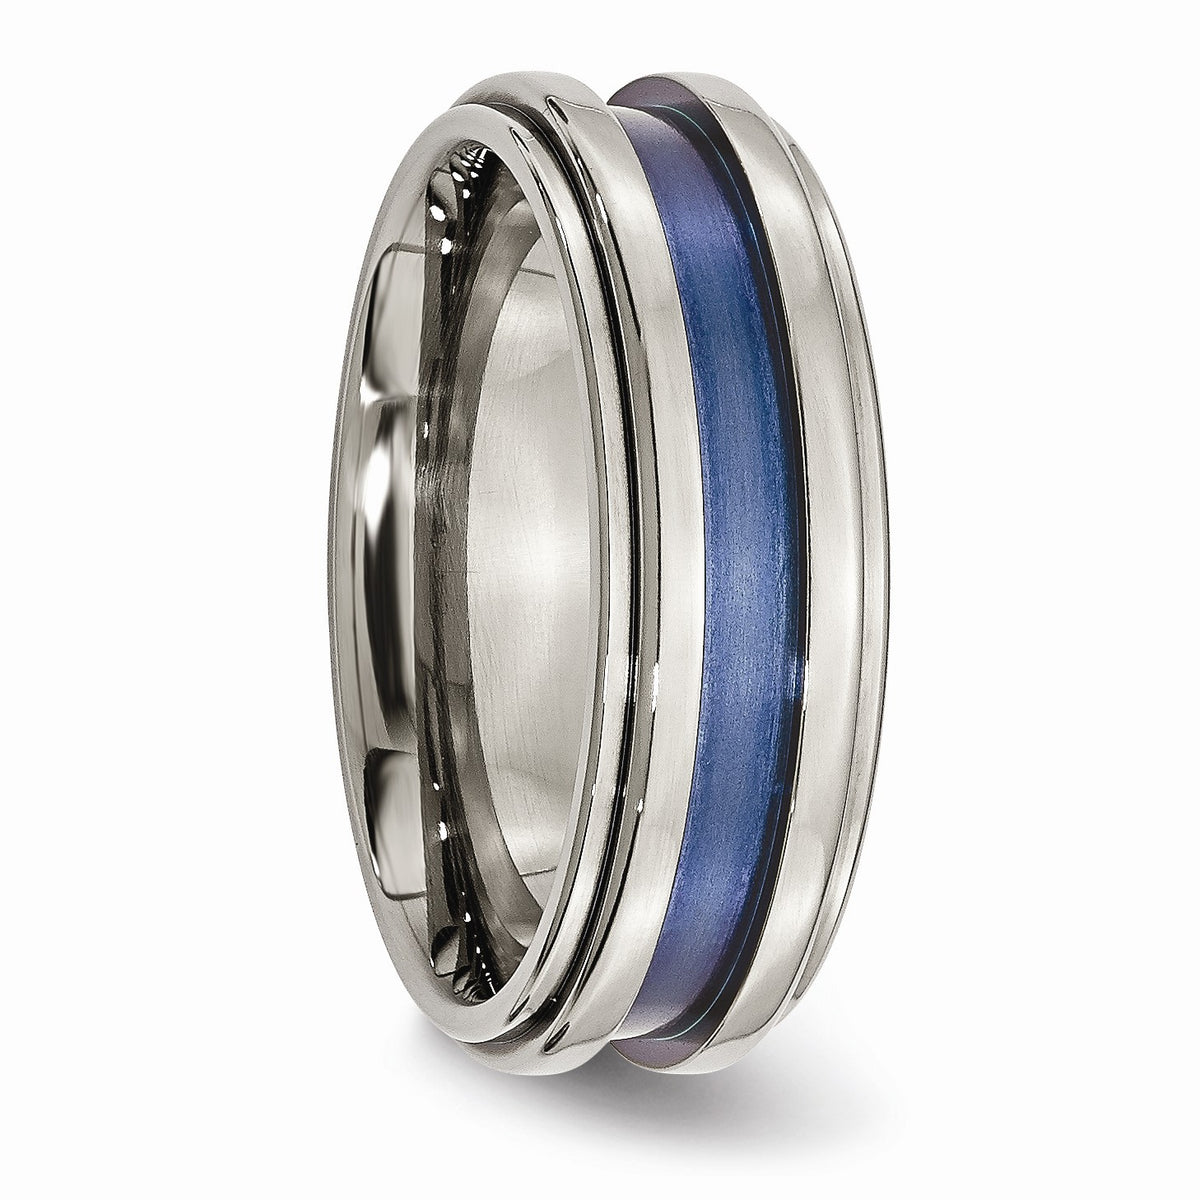 Alternate view of the 8mm Titanium Blue Groove Ridged Edge Polished Band by The Black Bow Jewelry Co.